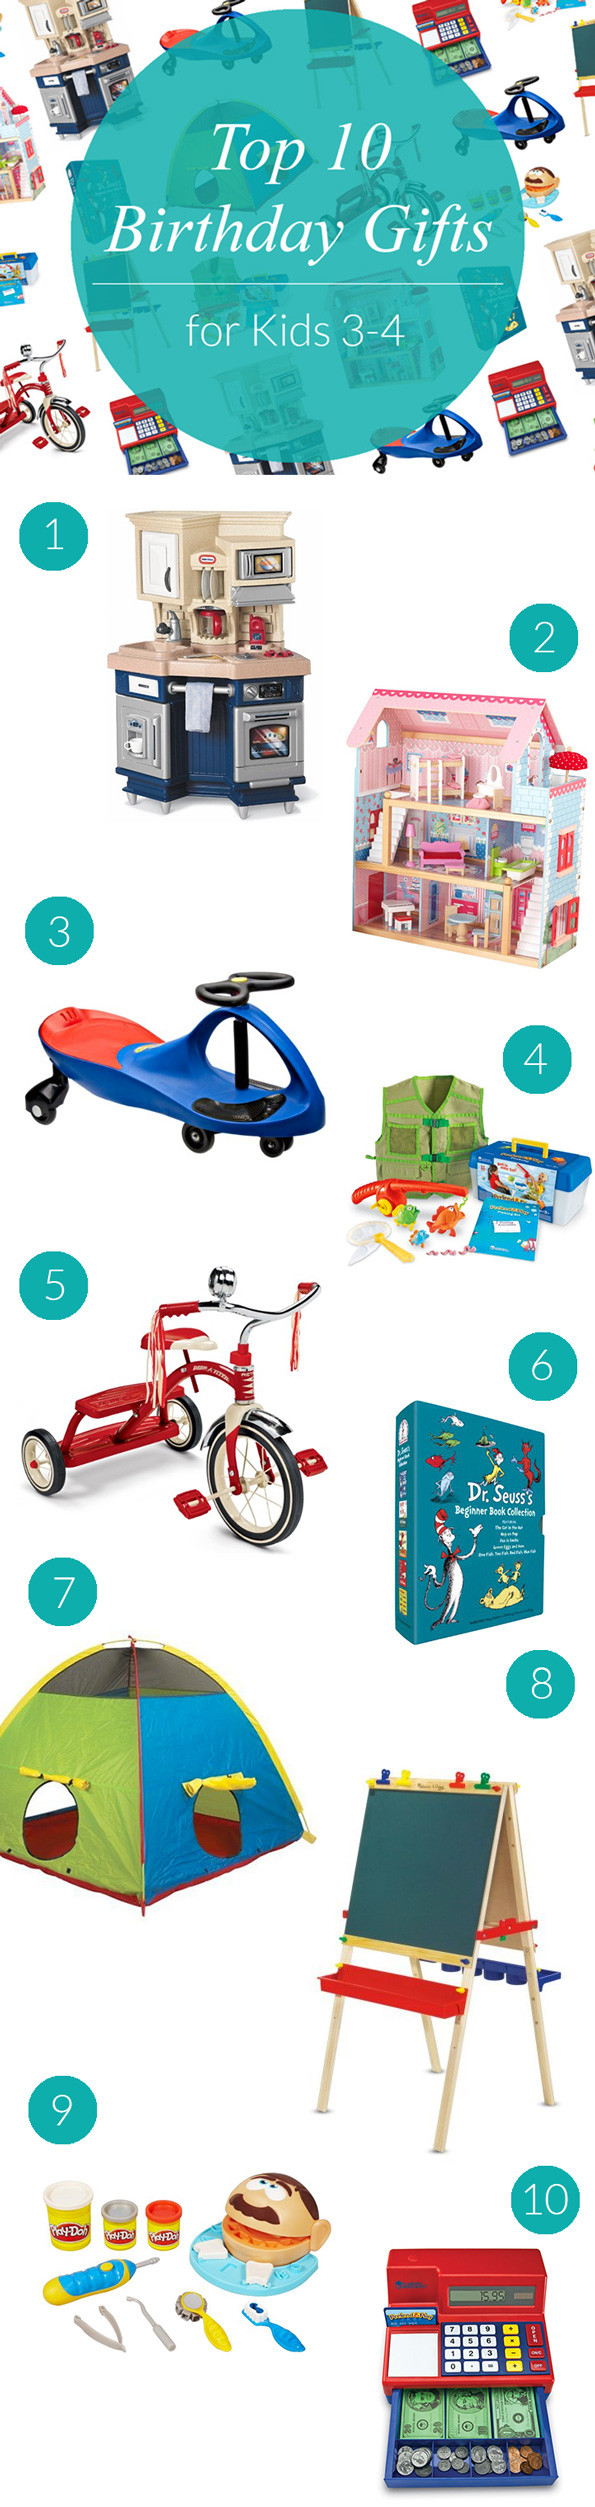 Top 10 Gifts For Kids
 Top 10 Birthday Gifts for Kids Ages 3 4 Evite